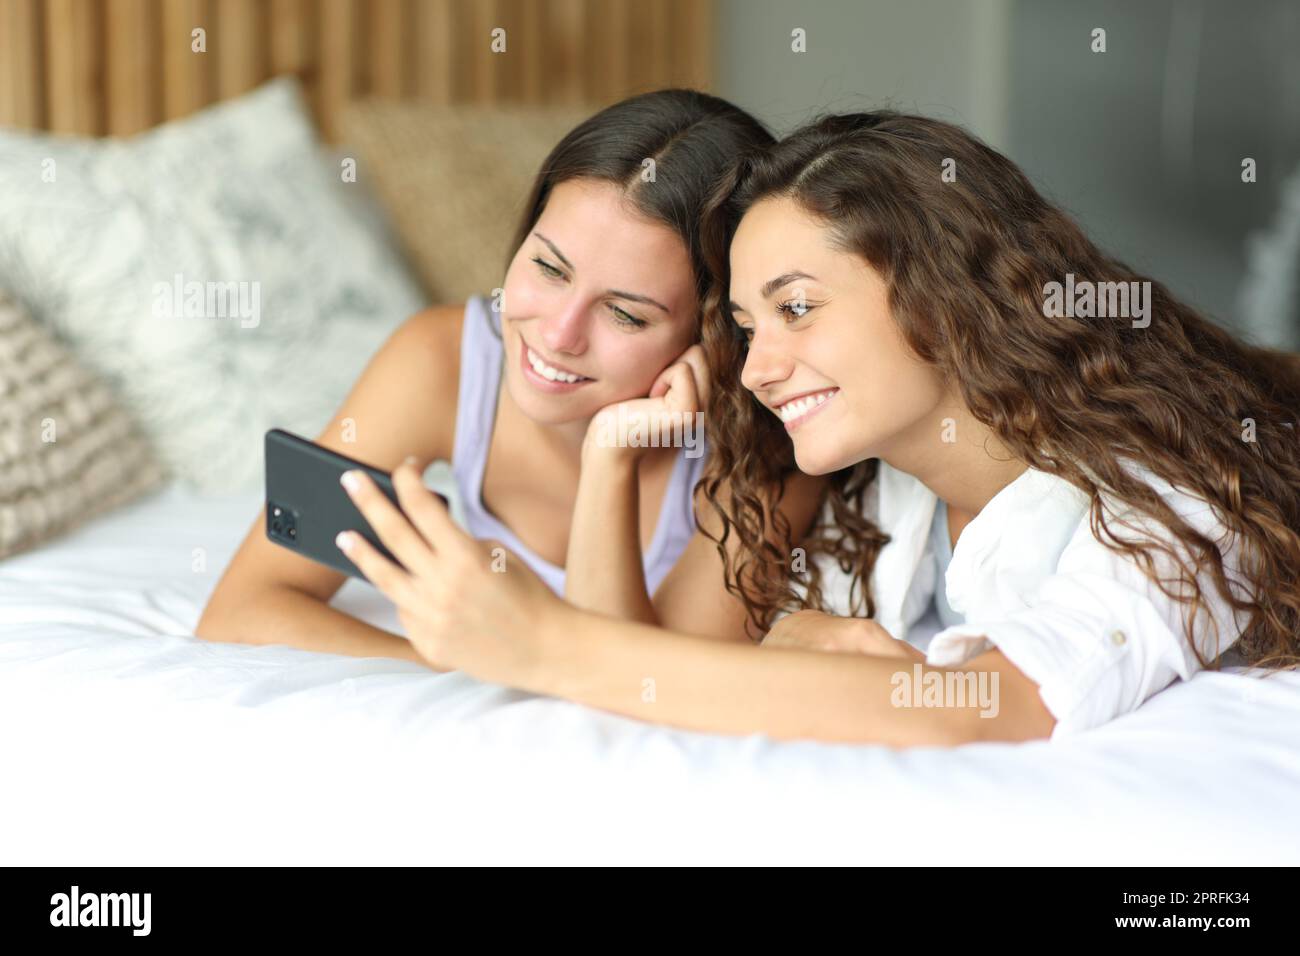 Two friends checking phone on a hotel bed Stock Photo